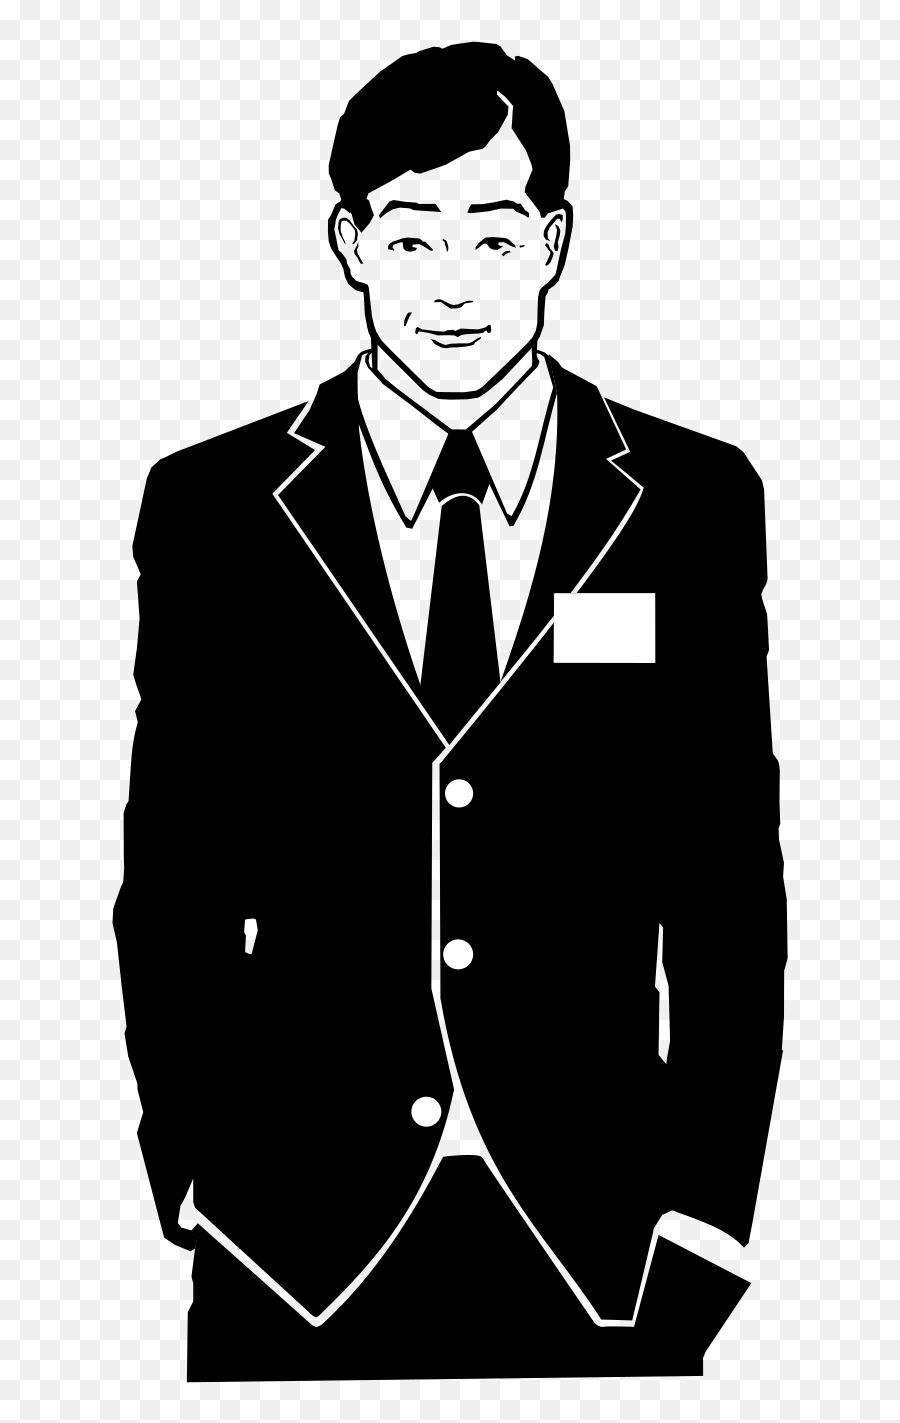 Businessman In Suit Svg Vector Clip Art - Lds Missionary Silhouette Png,Dude In. Suit Icon Png